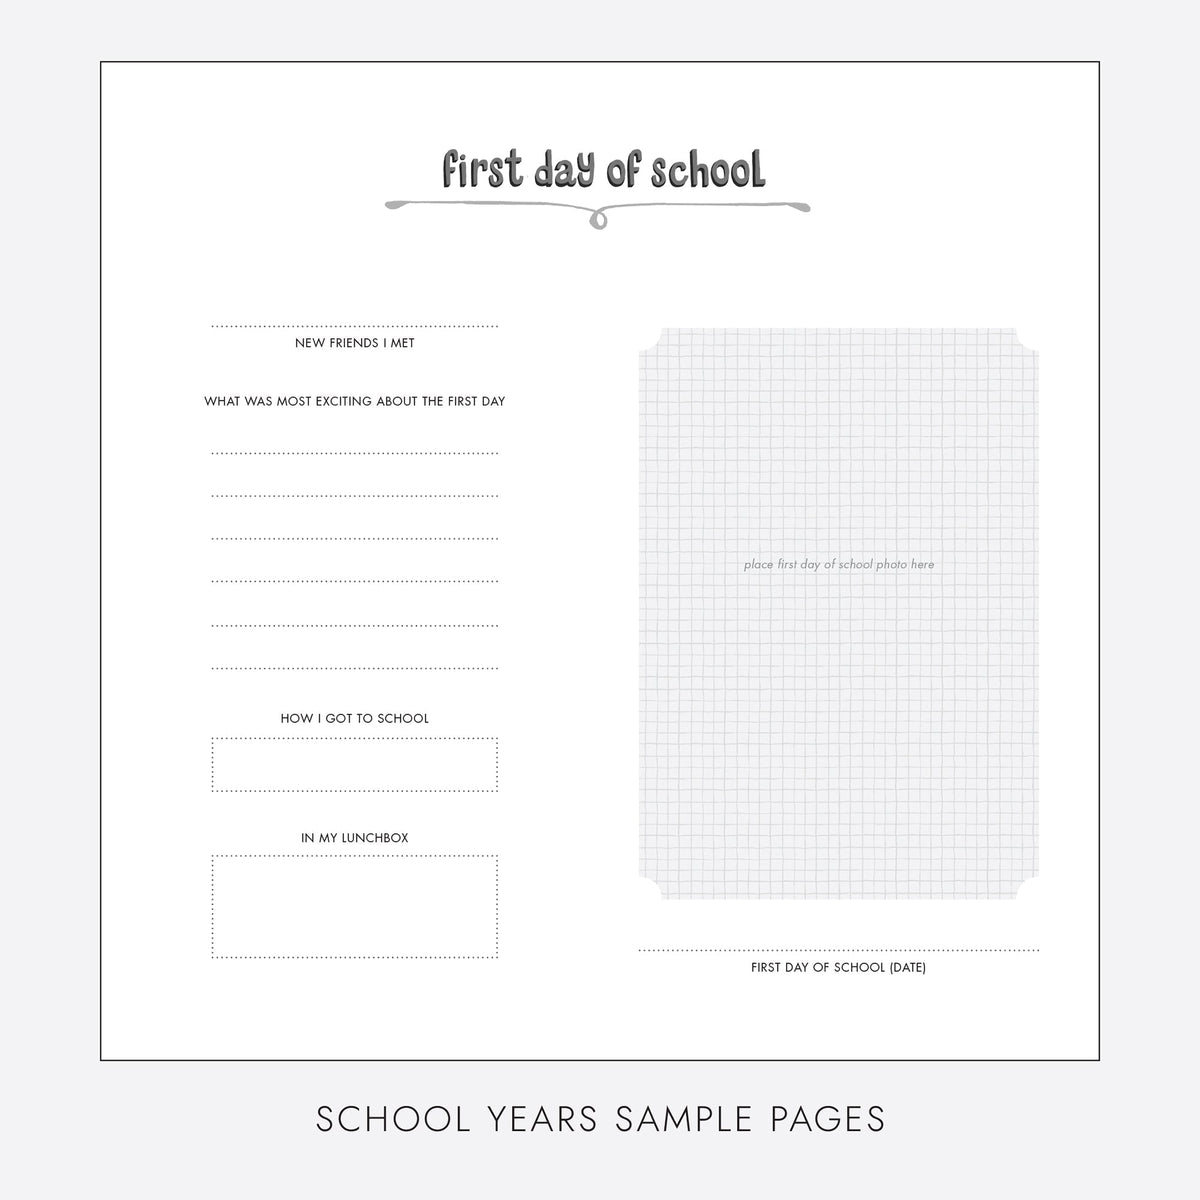 School Years with Celery Cotton Cover